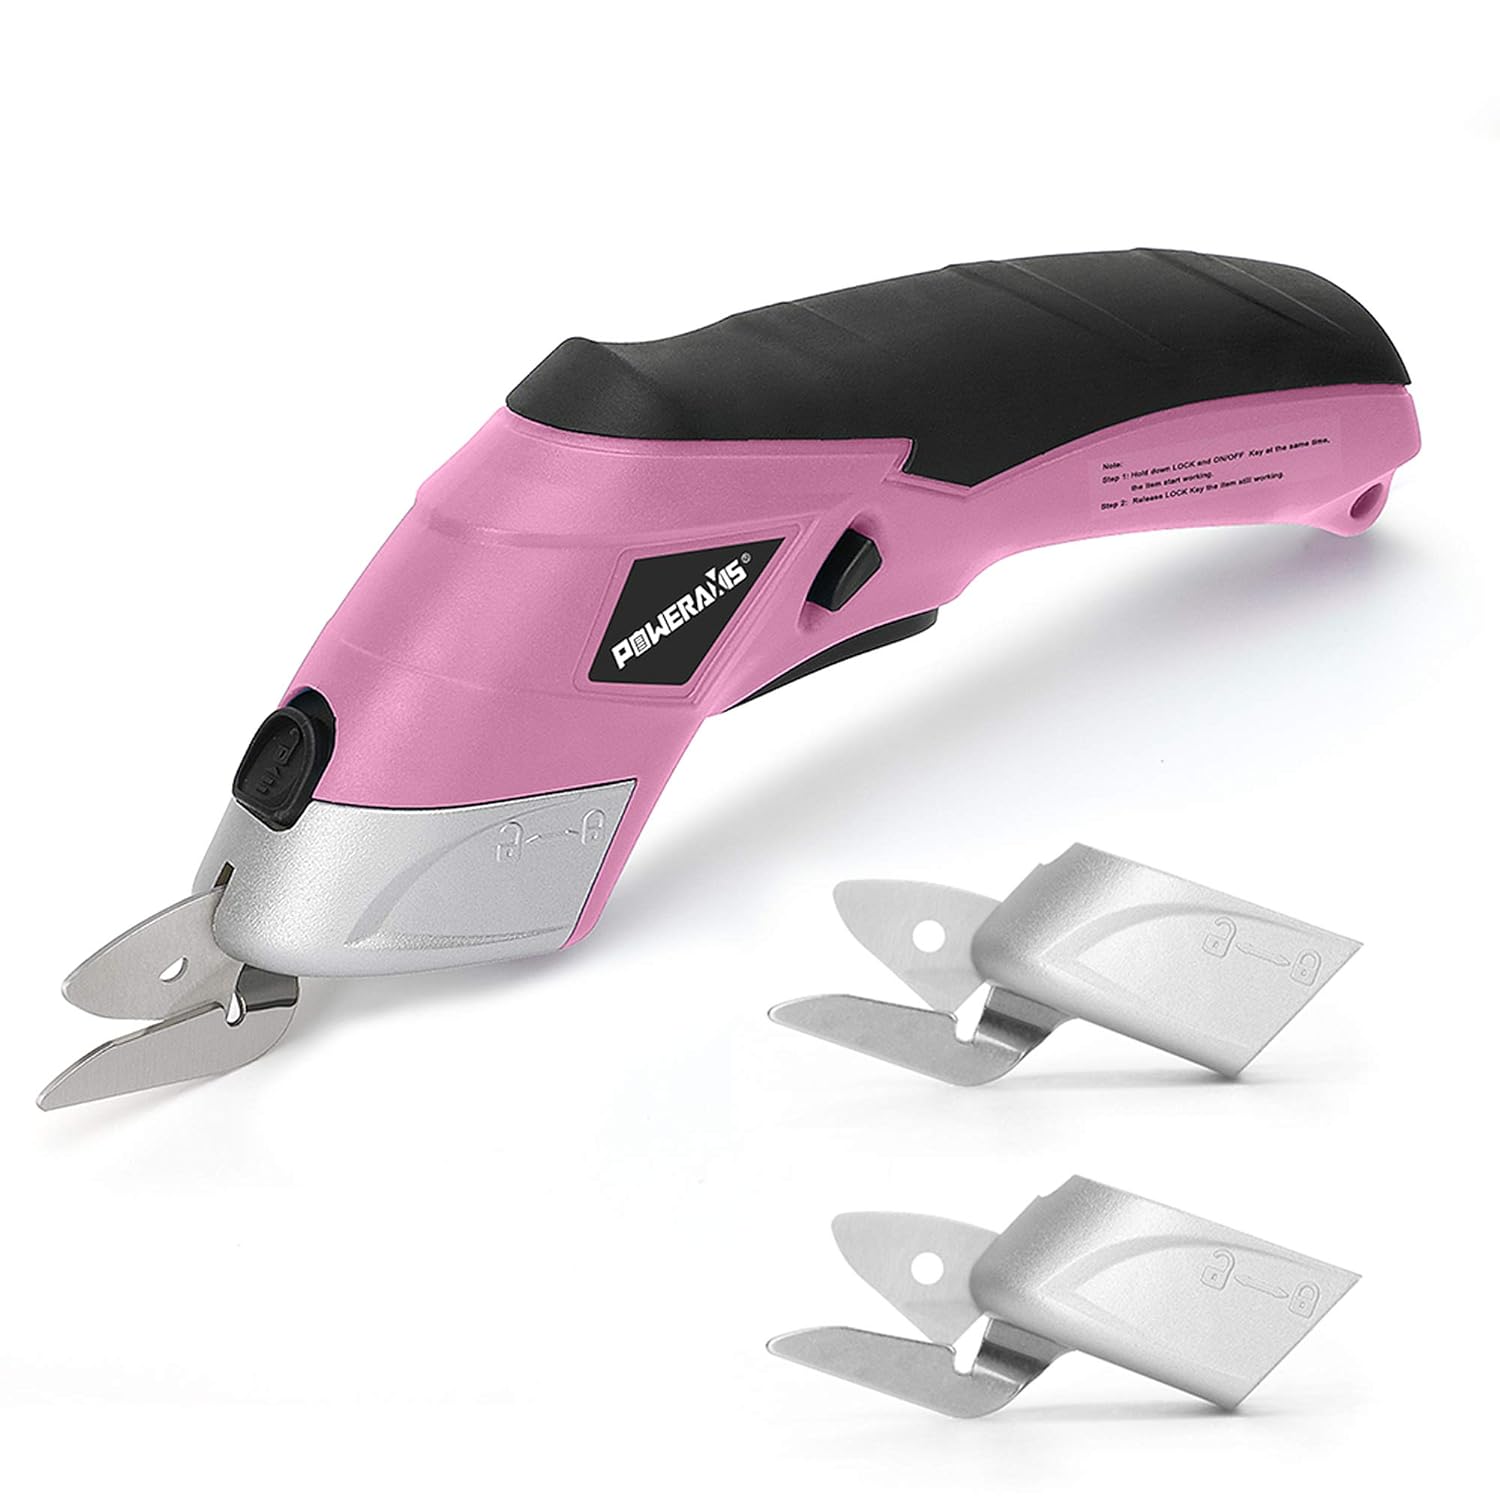 Electric Scissors, POWERAXIS Multi Cordless Electric Fabric Scissors with Two Blades, Electric Cutter for Fabric, Leather, Carpet,Paper,Cardboard with Release Safety Switch（Pink）